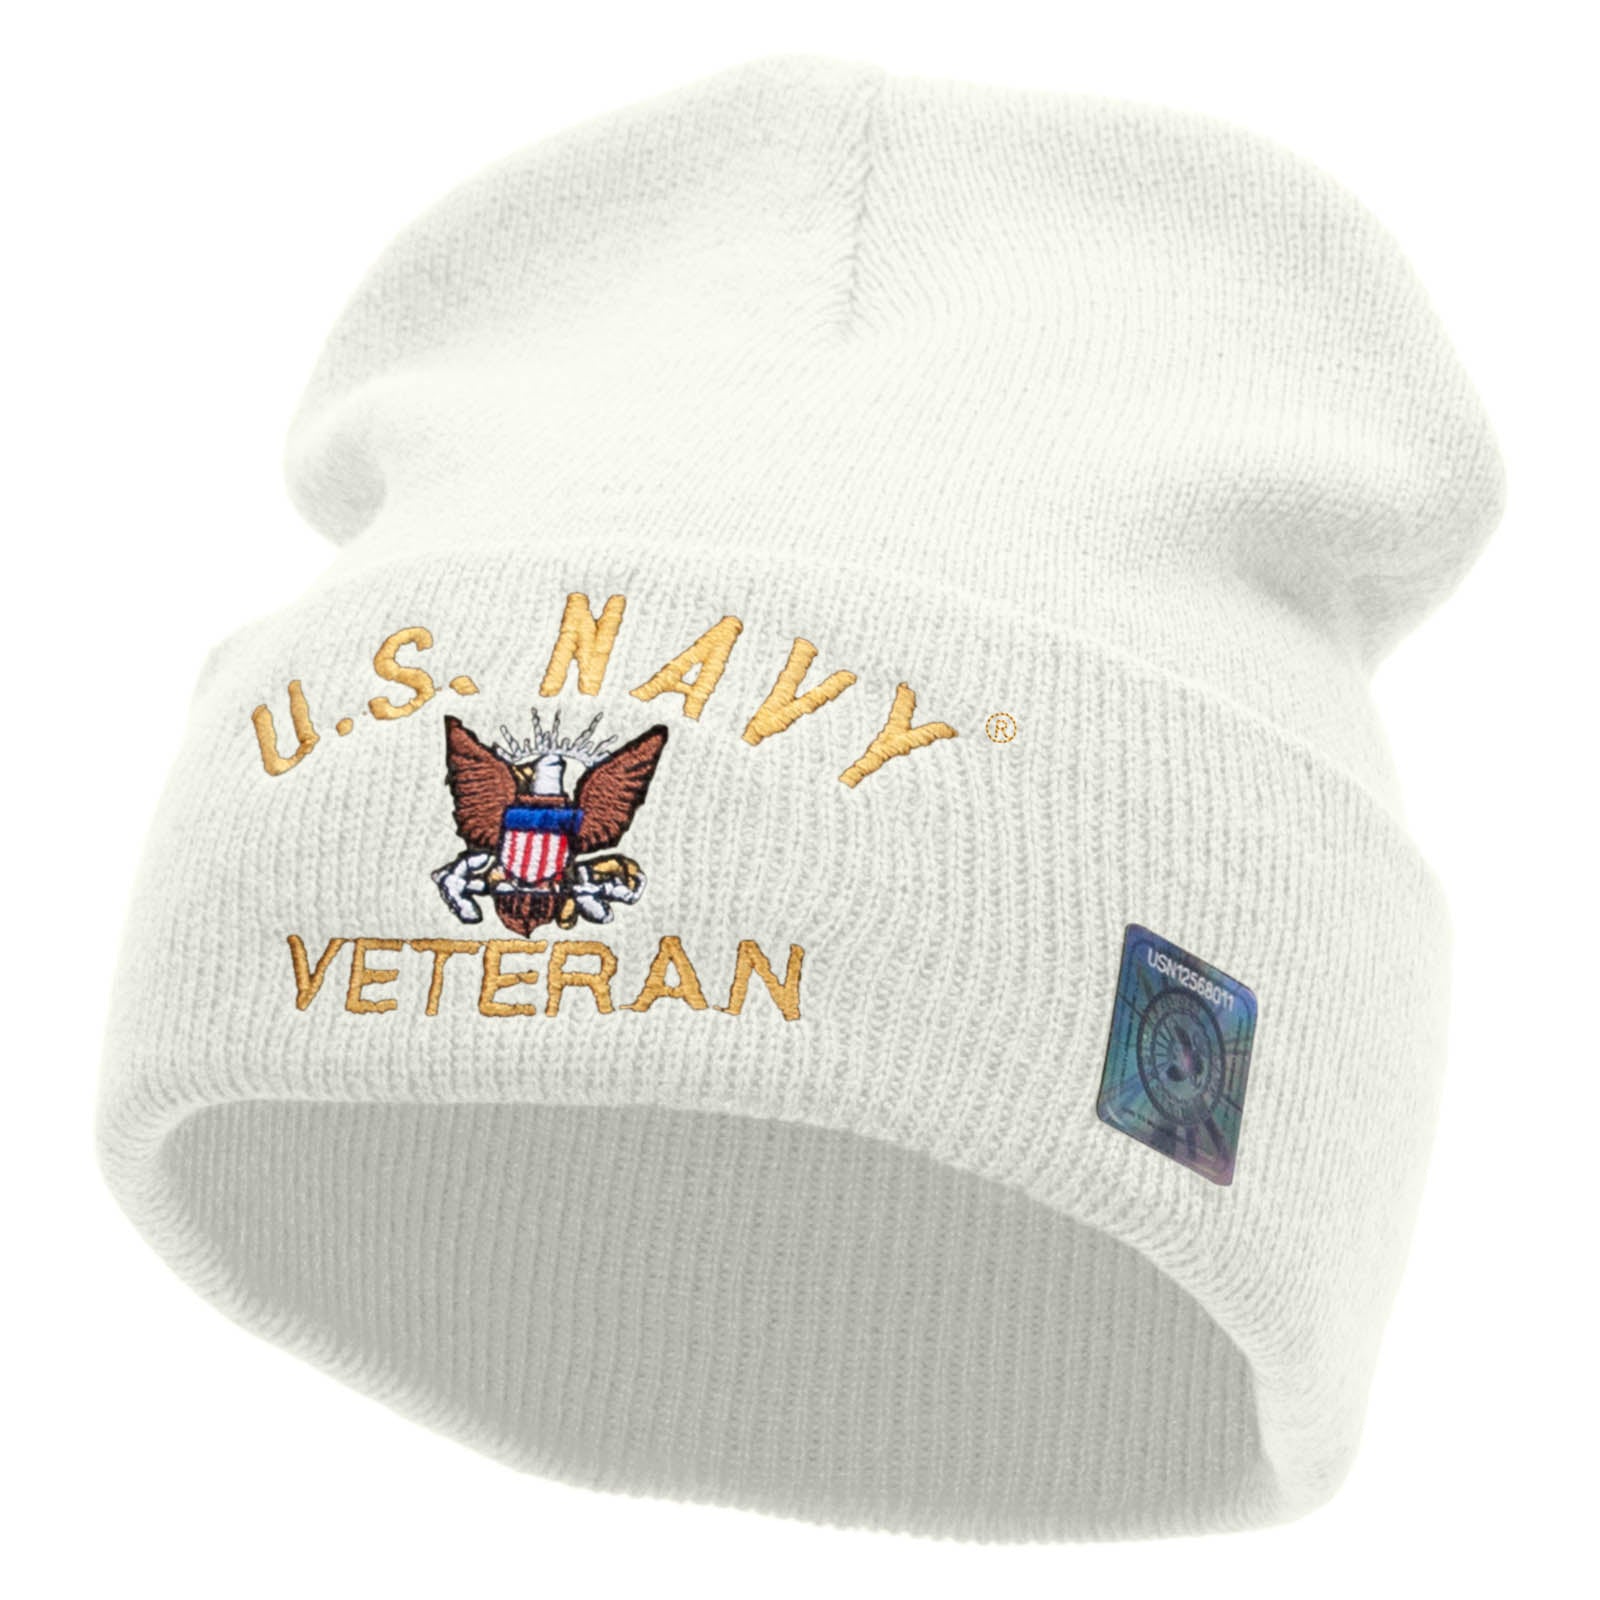 Licensed US Navy Veteran Military Embroidered Long Beanie Made in USA - White OSFM